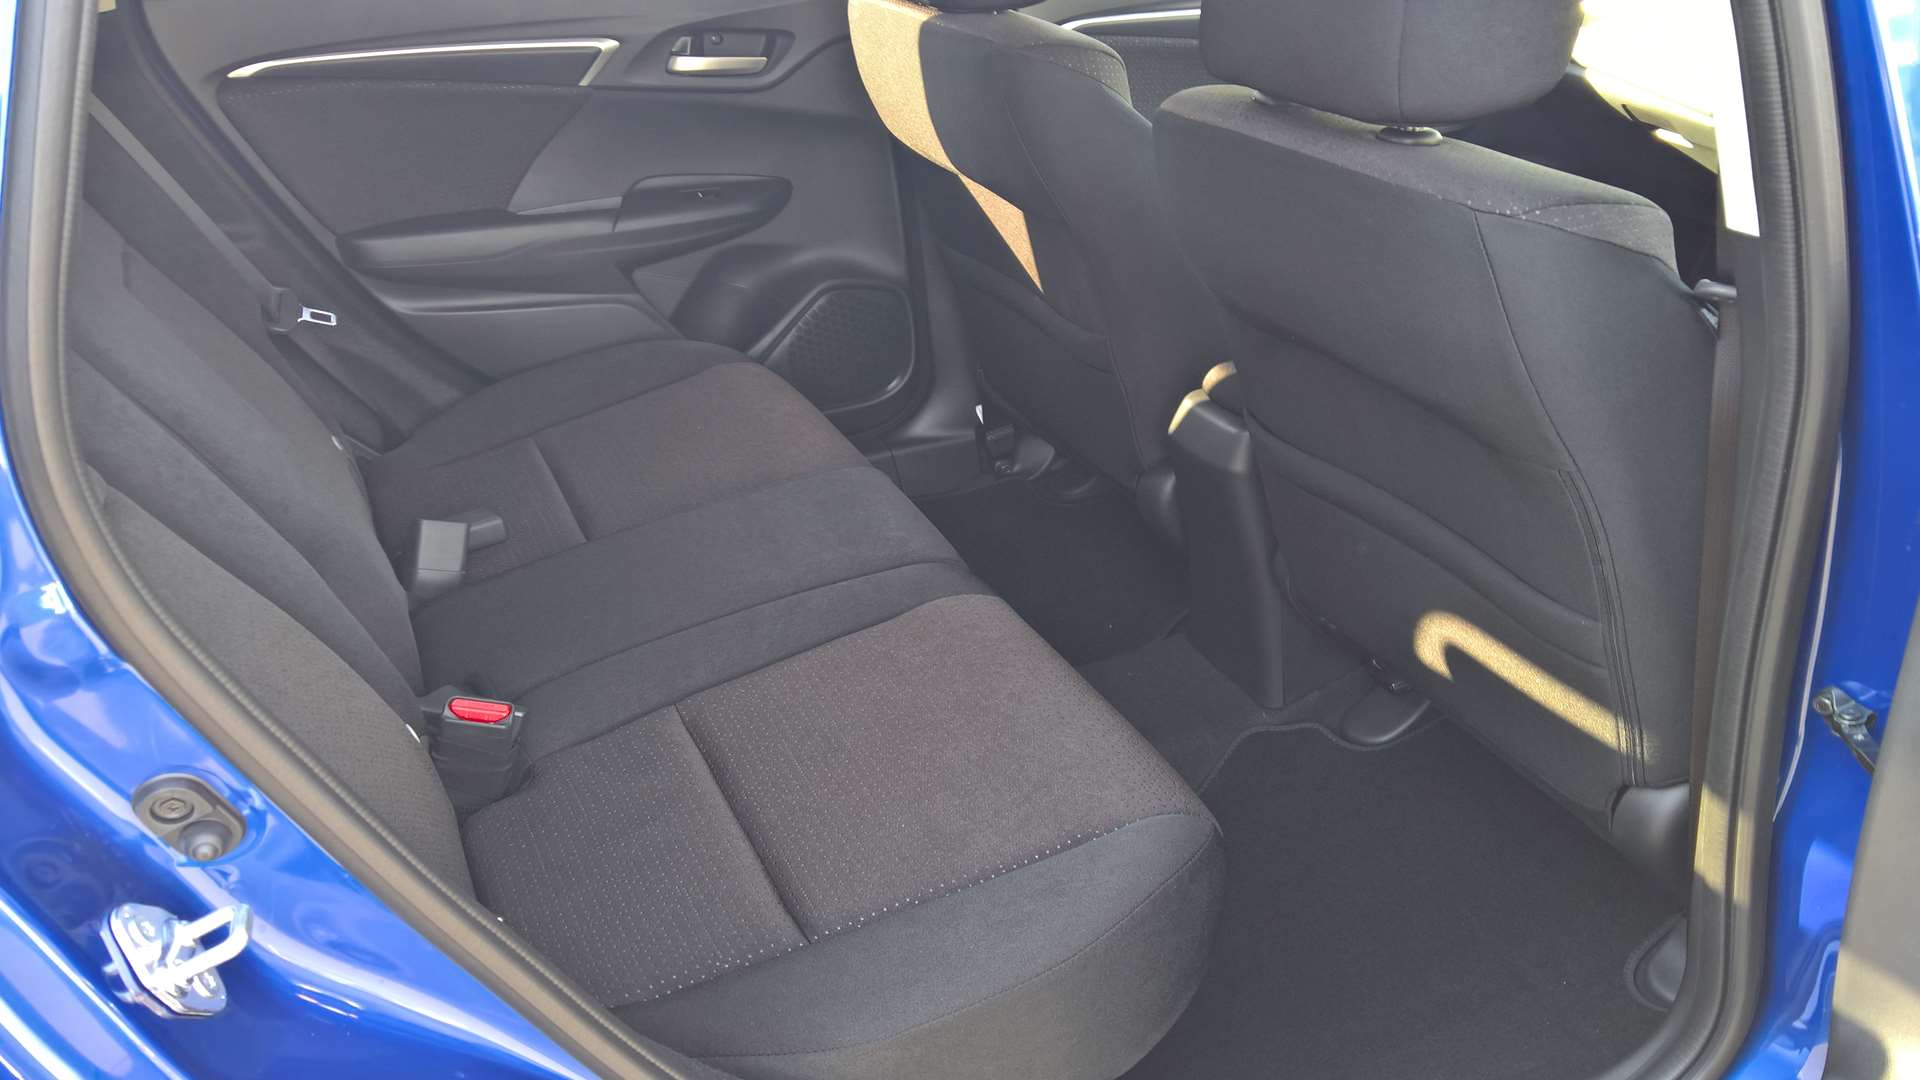 More knee room than a Mercedes S-Class, apparently